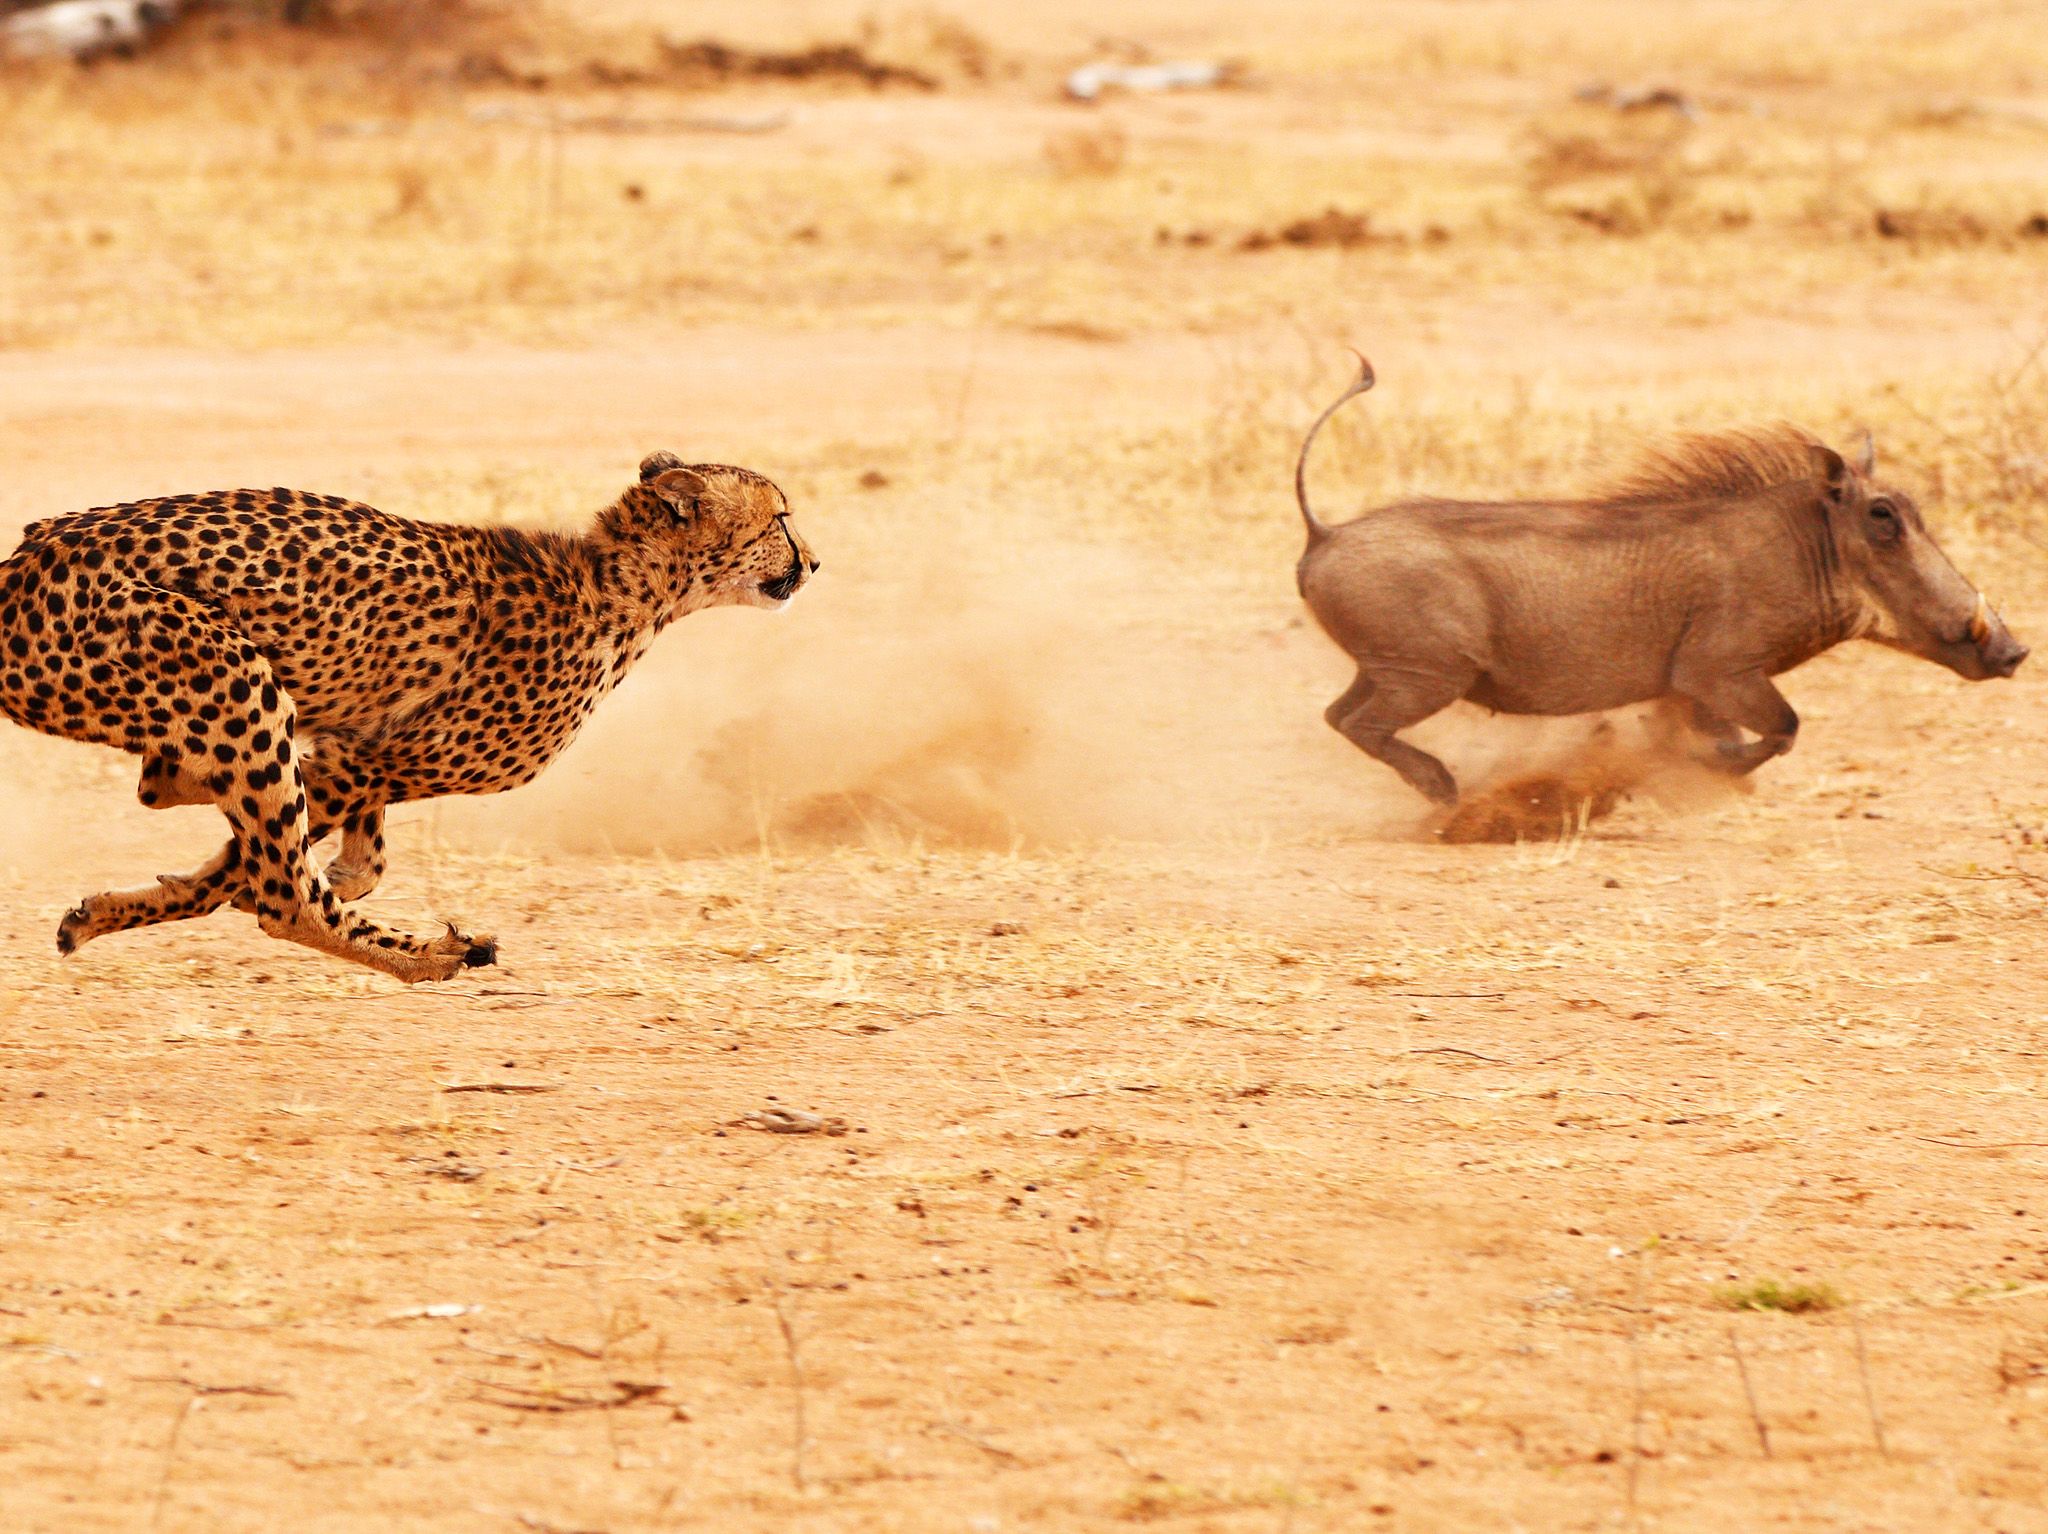 Cheetah chasing a warthog at top speed. This image is from World's Deadliest Lion. [Photo of the day - December 2020]